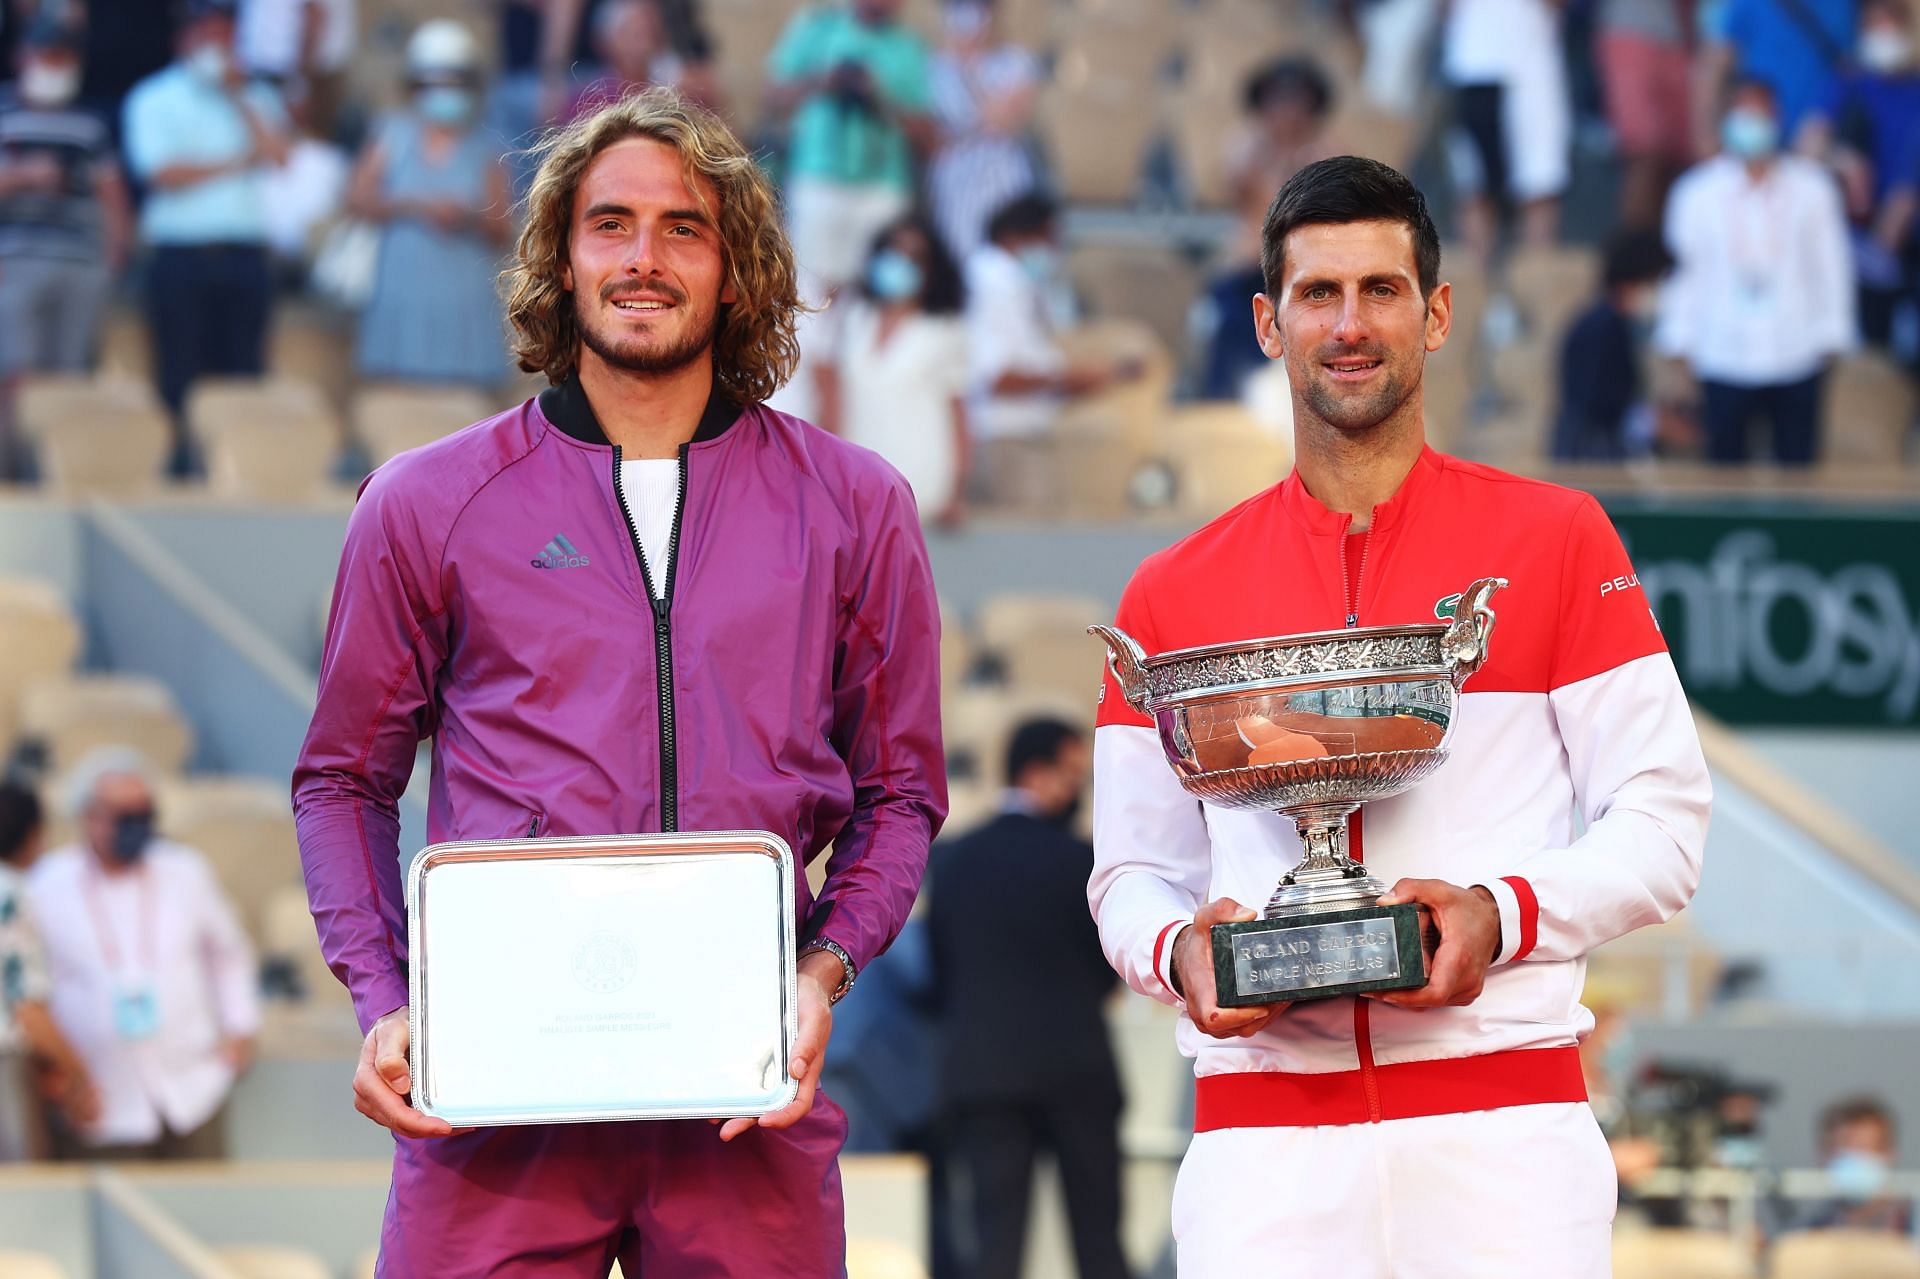 Novak Djokovic vs Stefanos Tsitsipas Where to watch, TV schedule, live streaming details and more 2022 ATP Finals